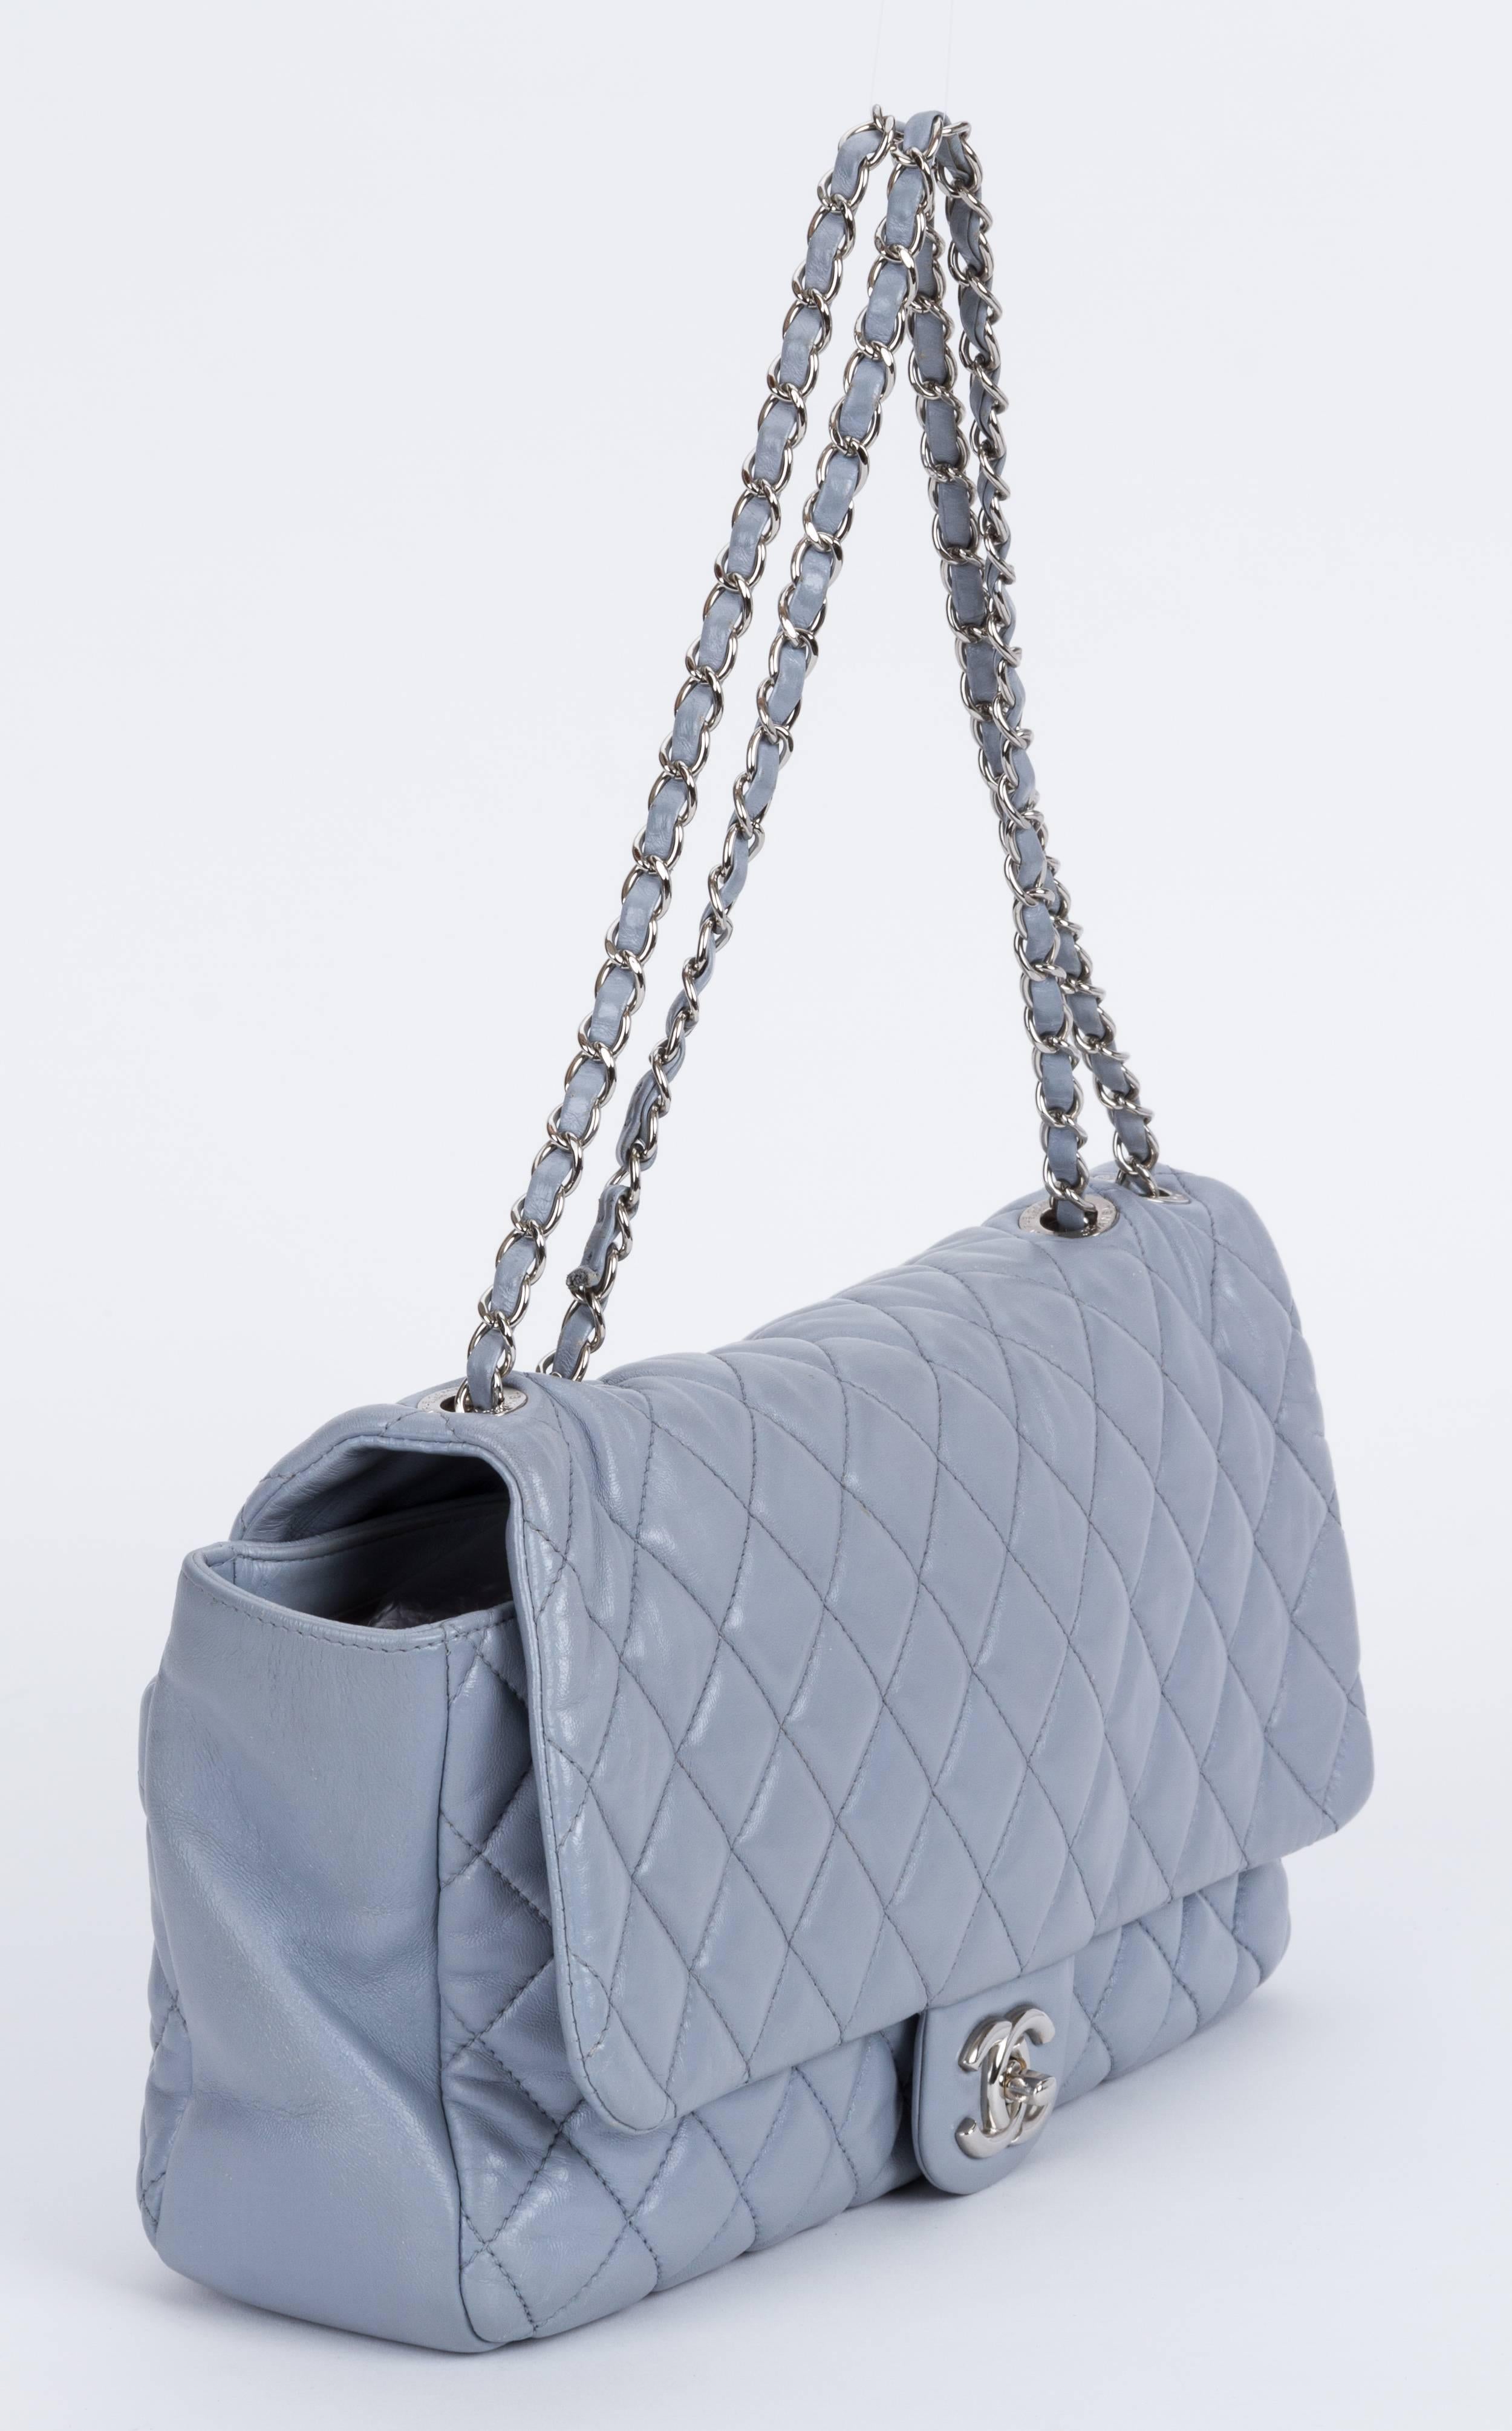 Chanel limited edition grey lambskin quilted maxi flap with silver tone hardware. Special edition with retractable rain jacket. Measurements: 13